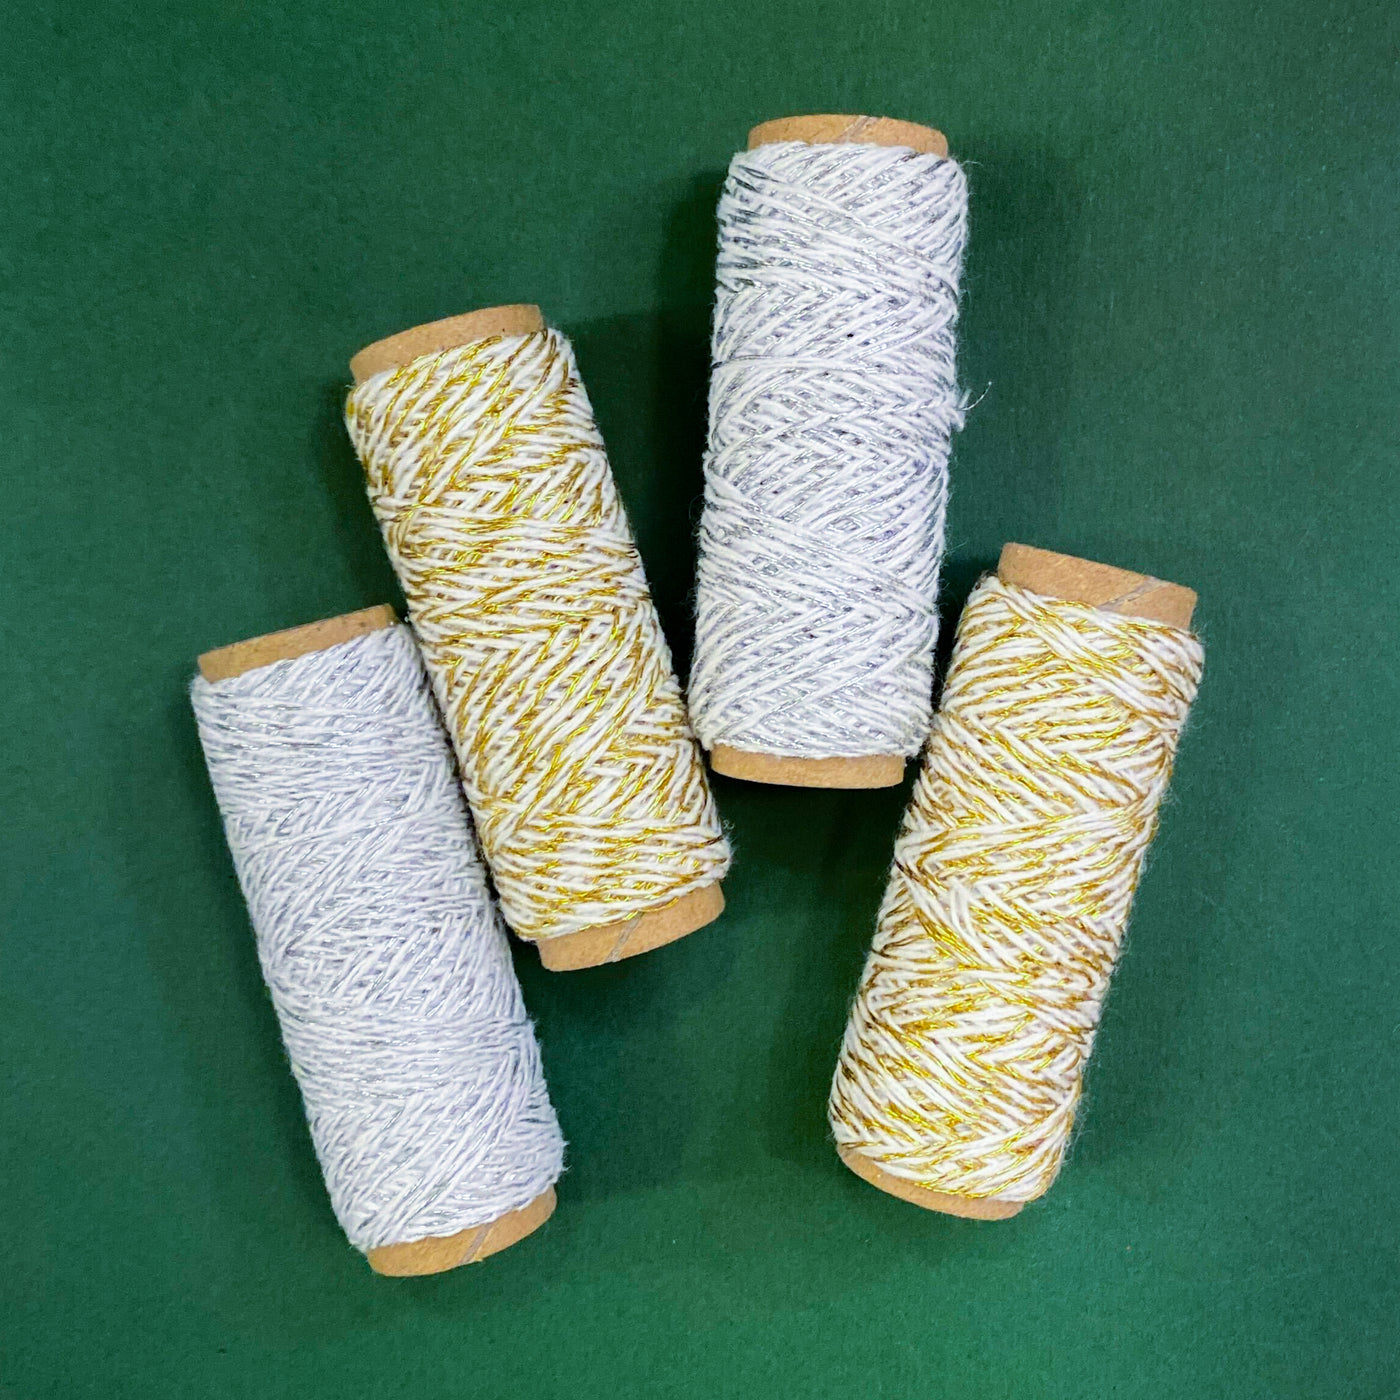 4 Spools Holiday Bakers Twine in Gold and Silver